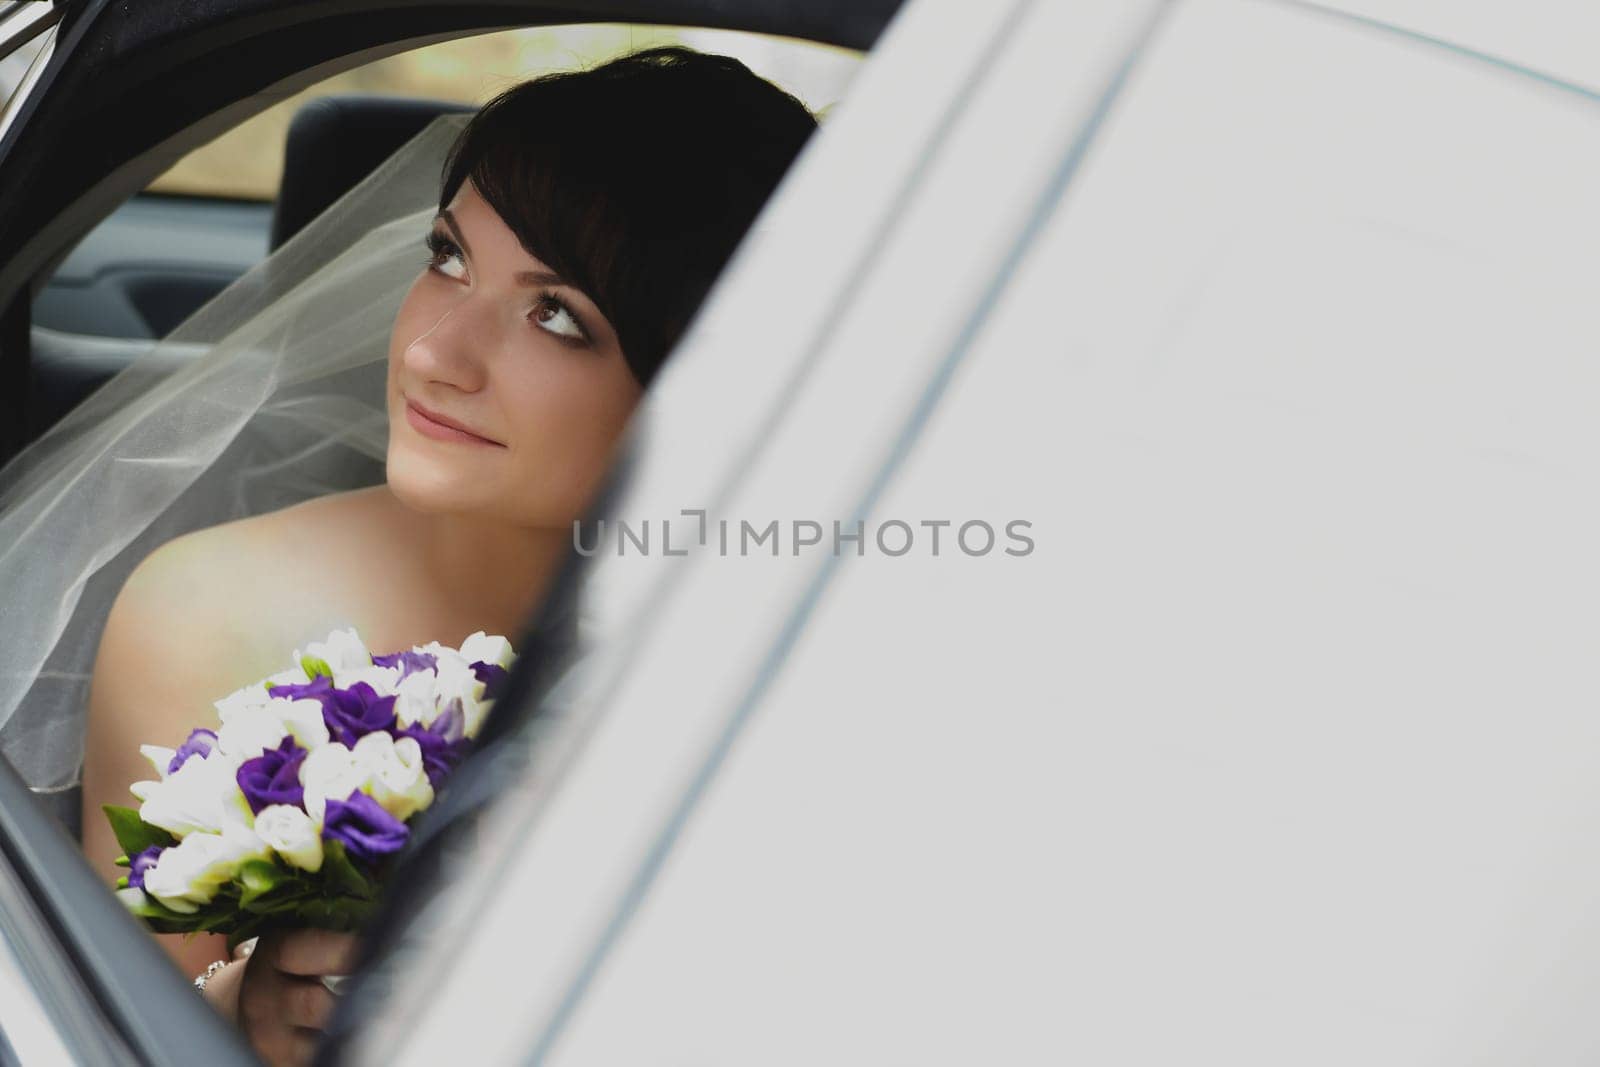 Bride in close-up with a bouquet of flowers at the open car door by Mastak80